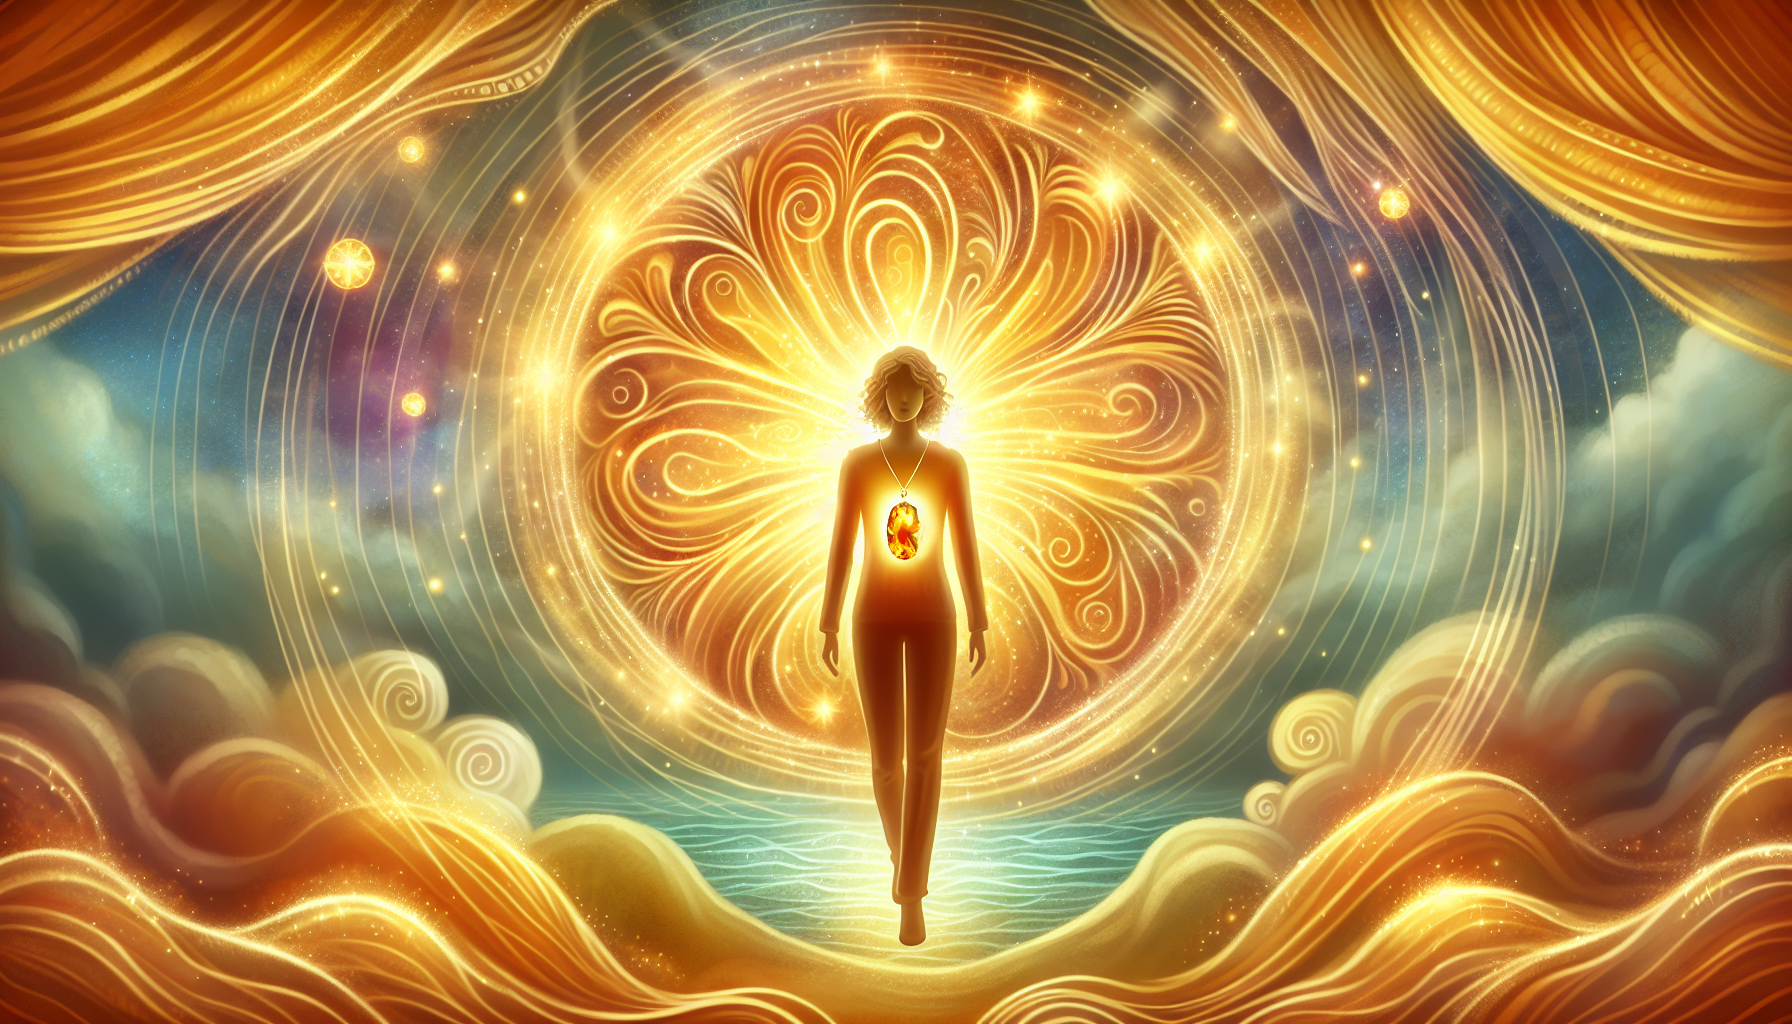 Illustration of a person surrounded by positive energy